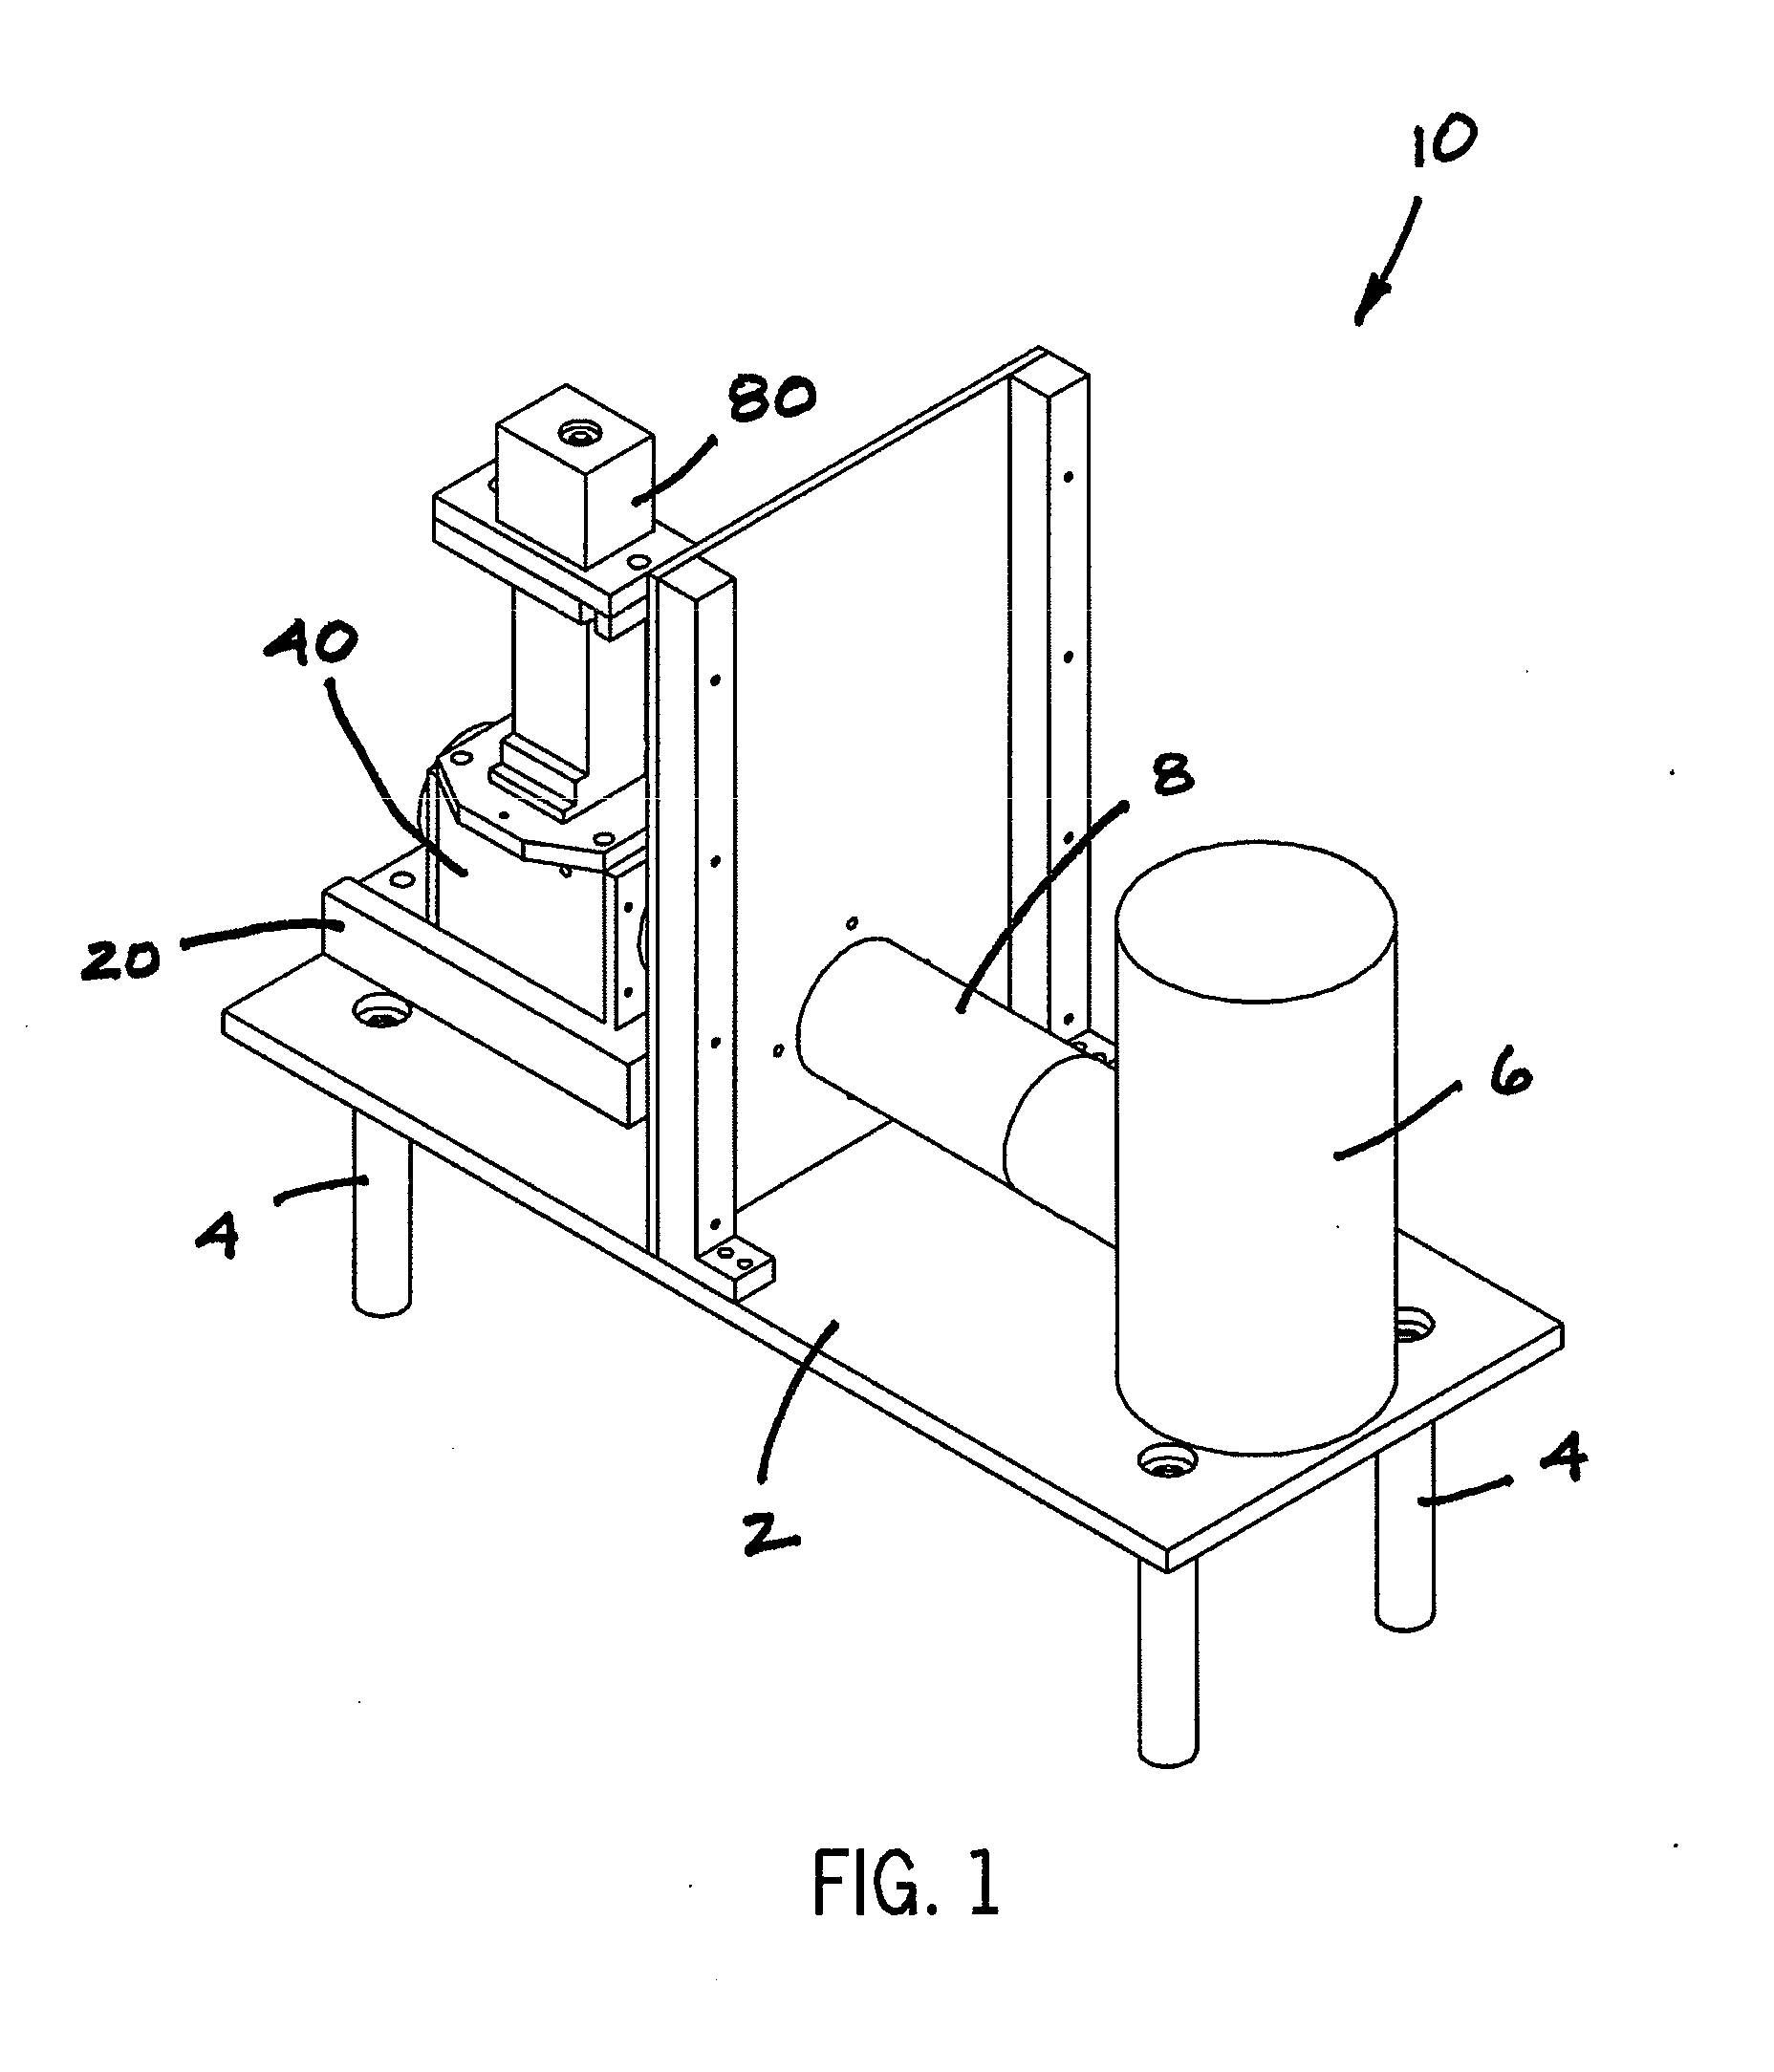 Bone mill assembly for use with cortical and cancellous bone